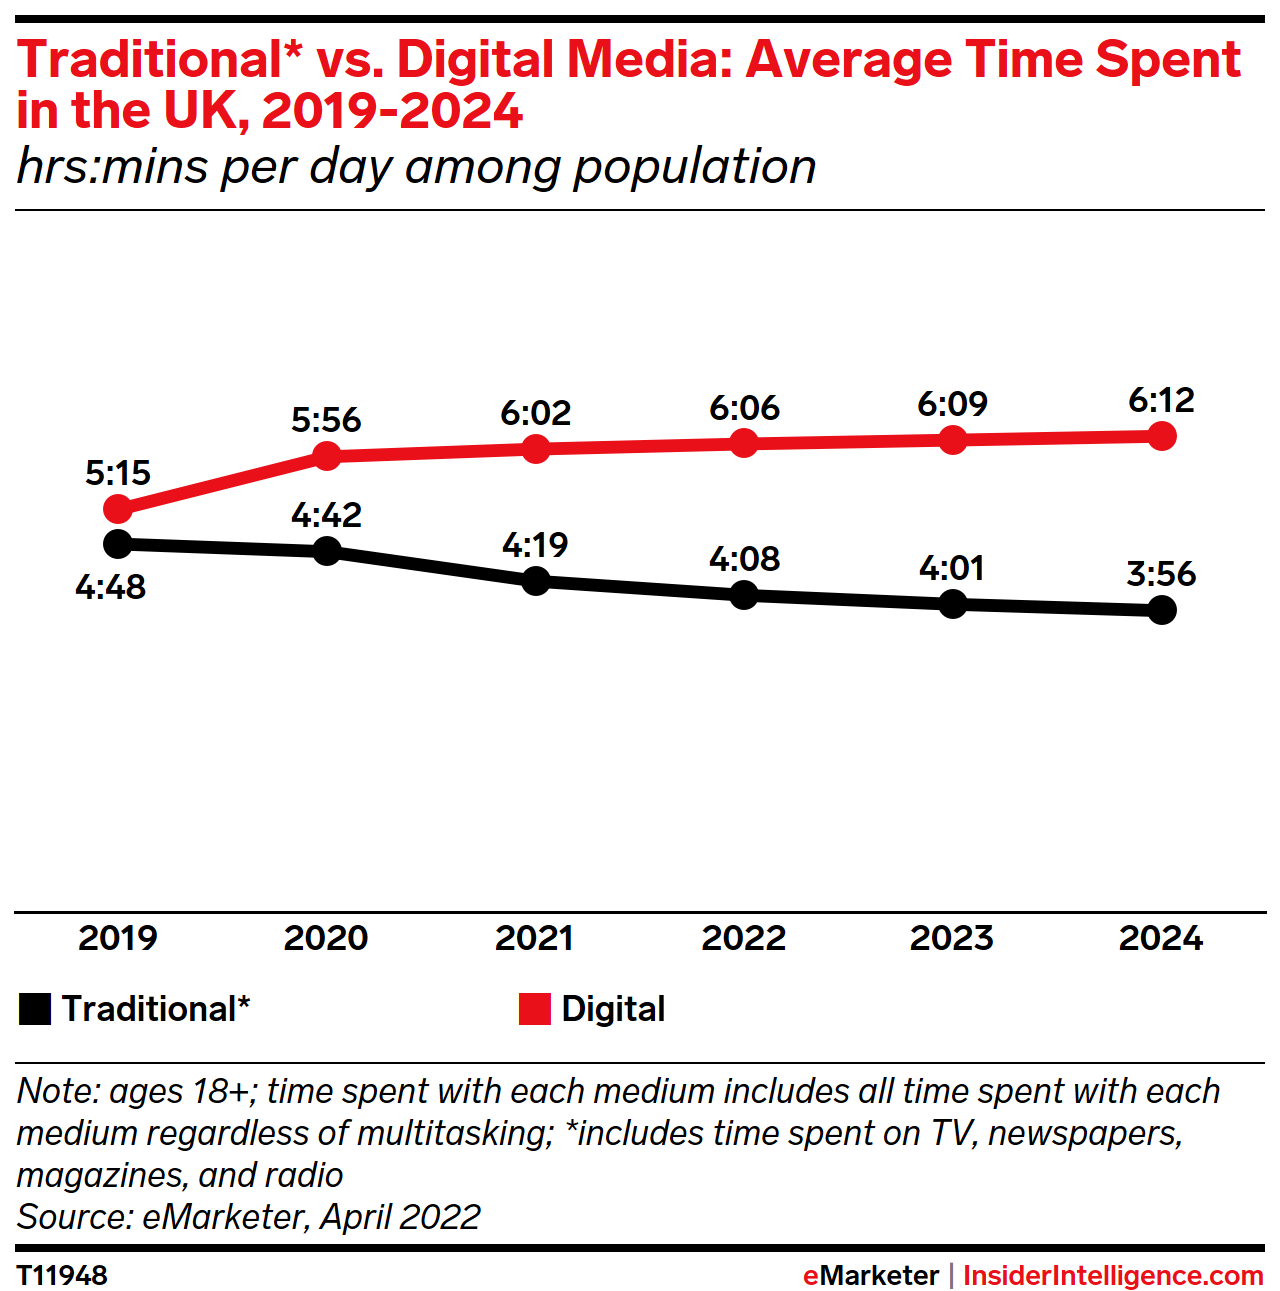 Traditional* vs. Digital Media: Average Time Spent in the UK, 2019-2024 (hrs:mins per day among population)